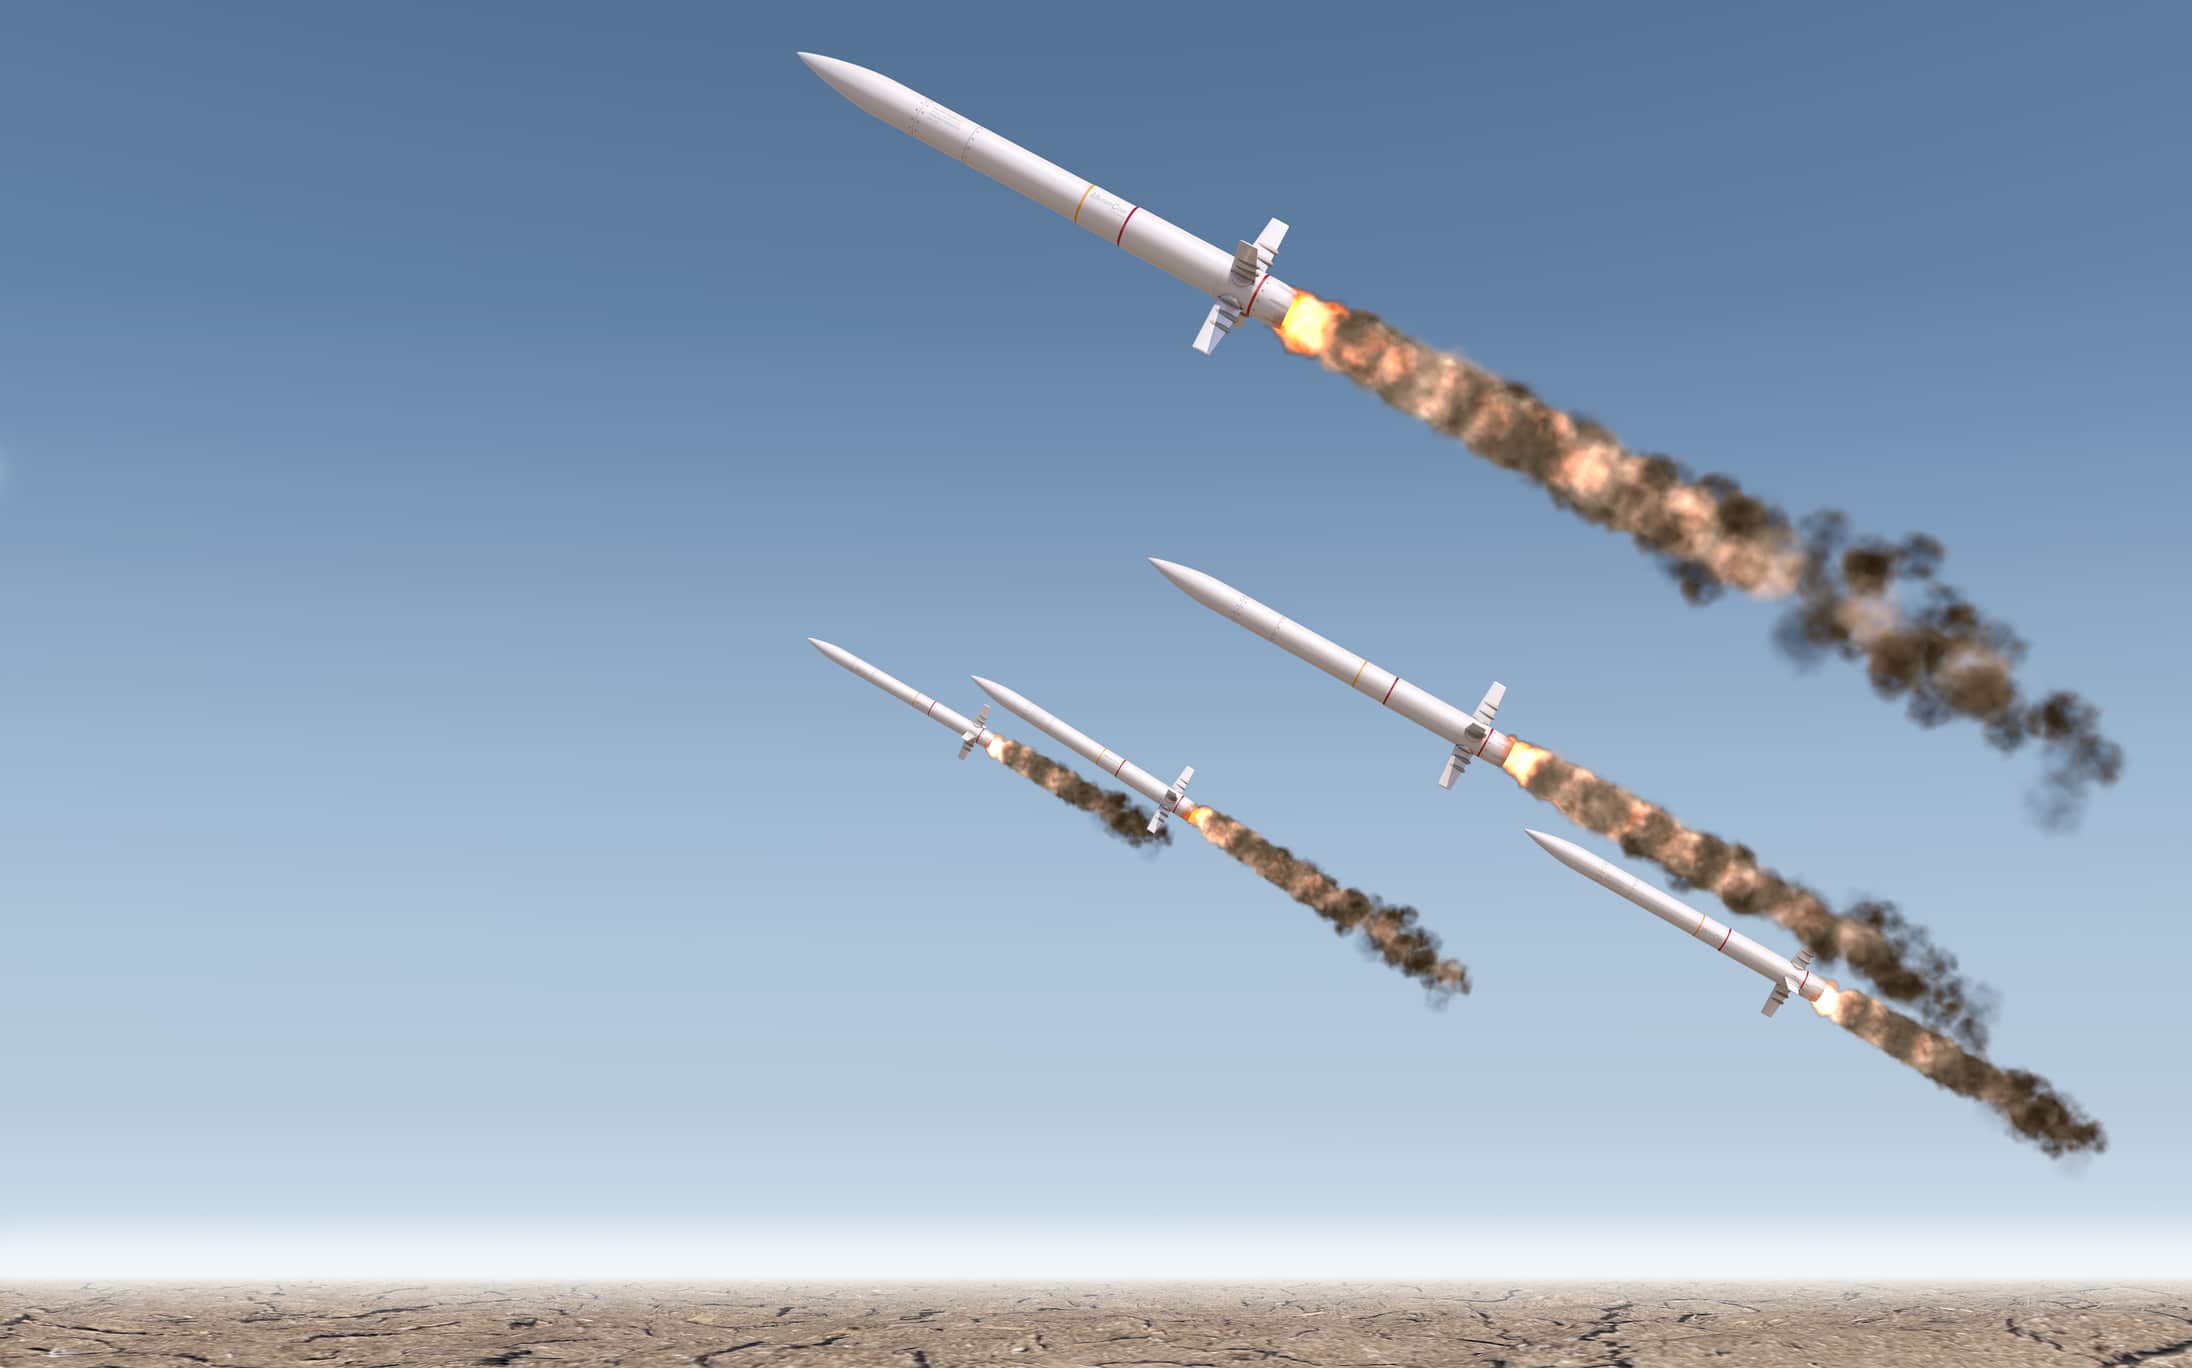 A row of intercontinental ballistic missiles launching in a desert